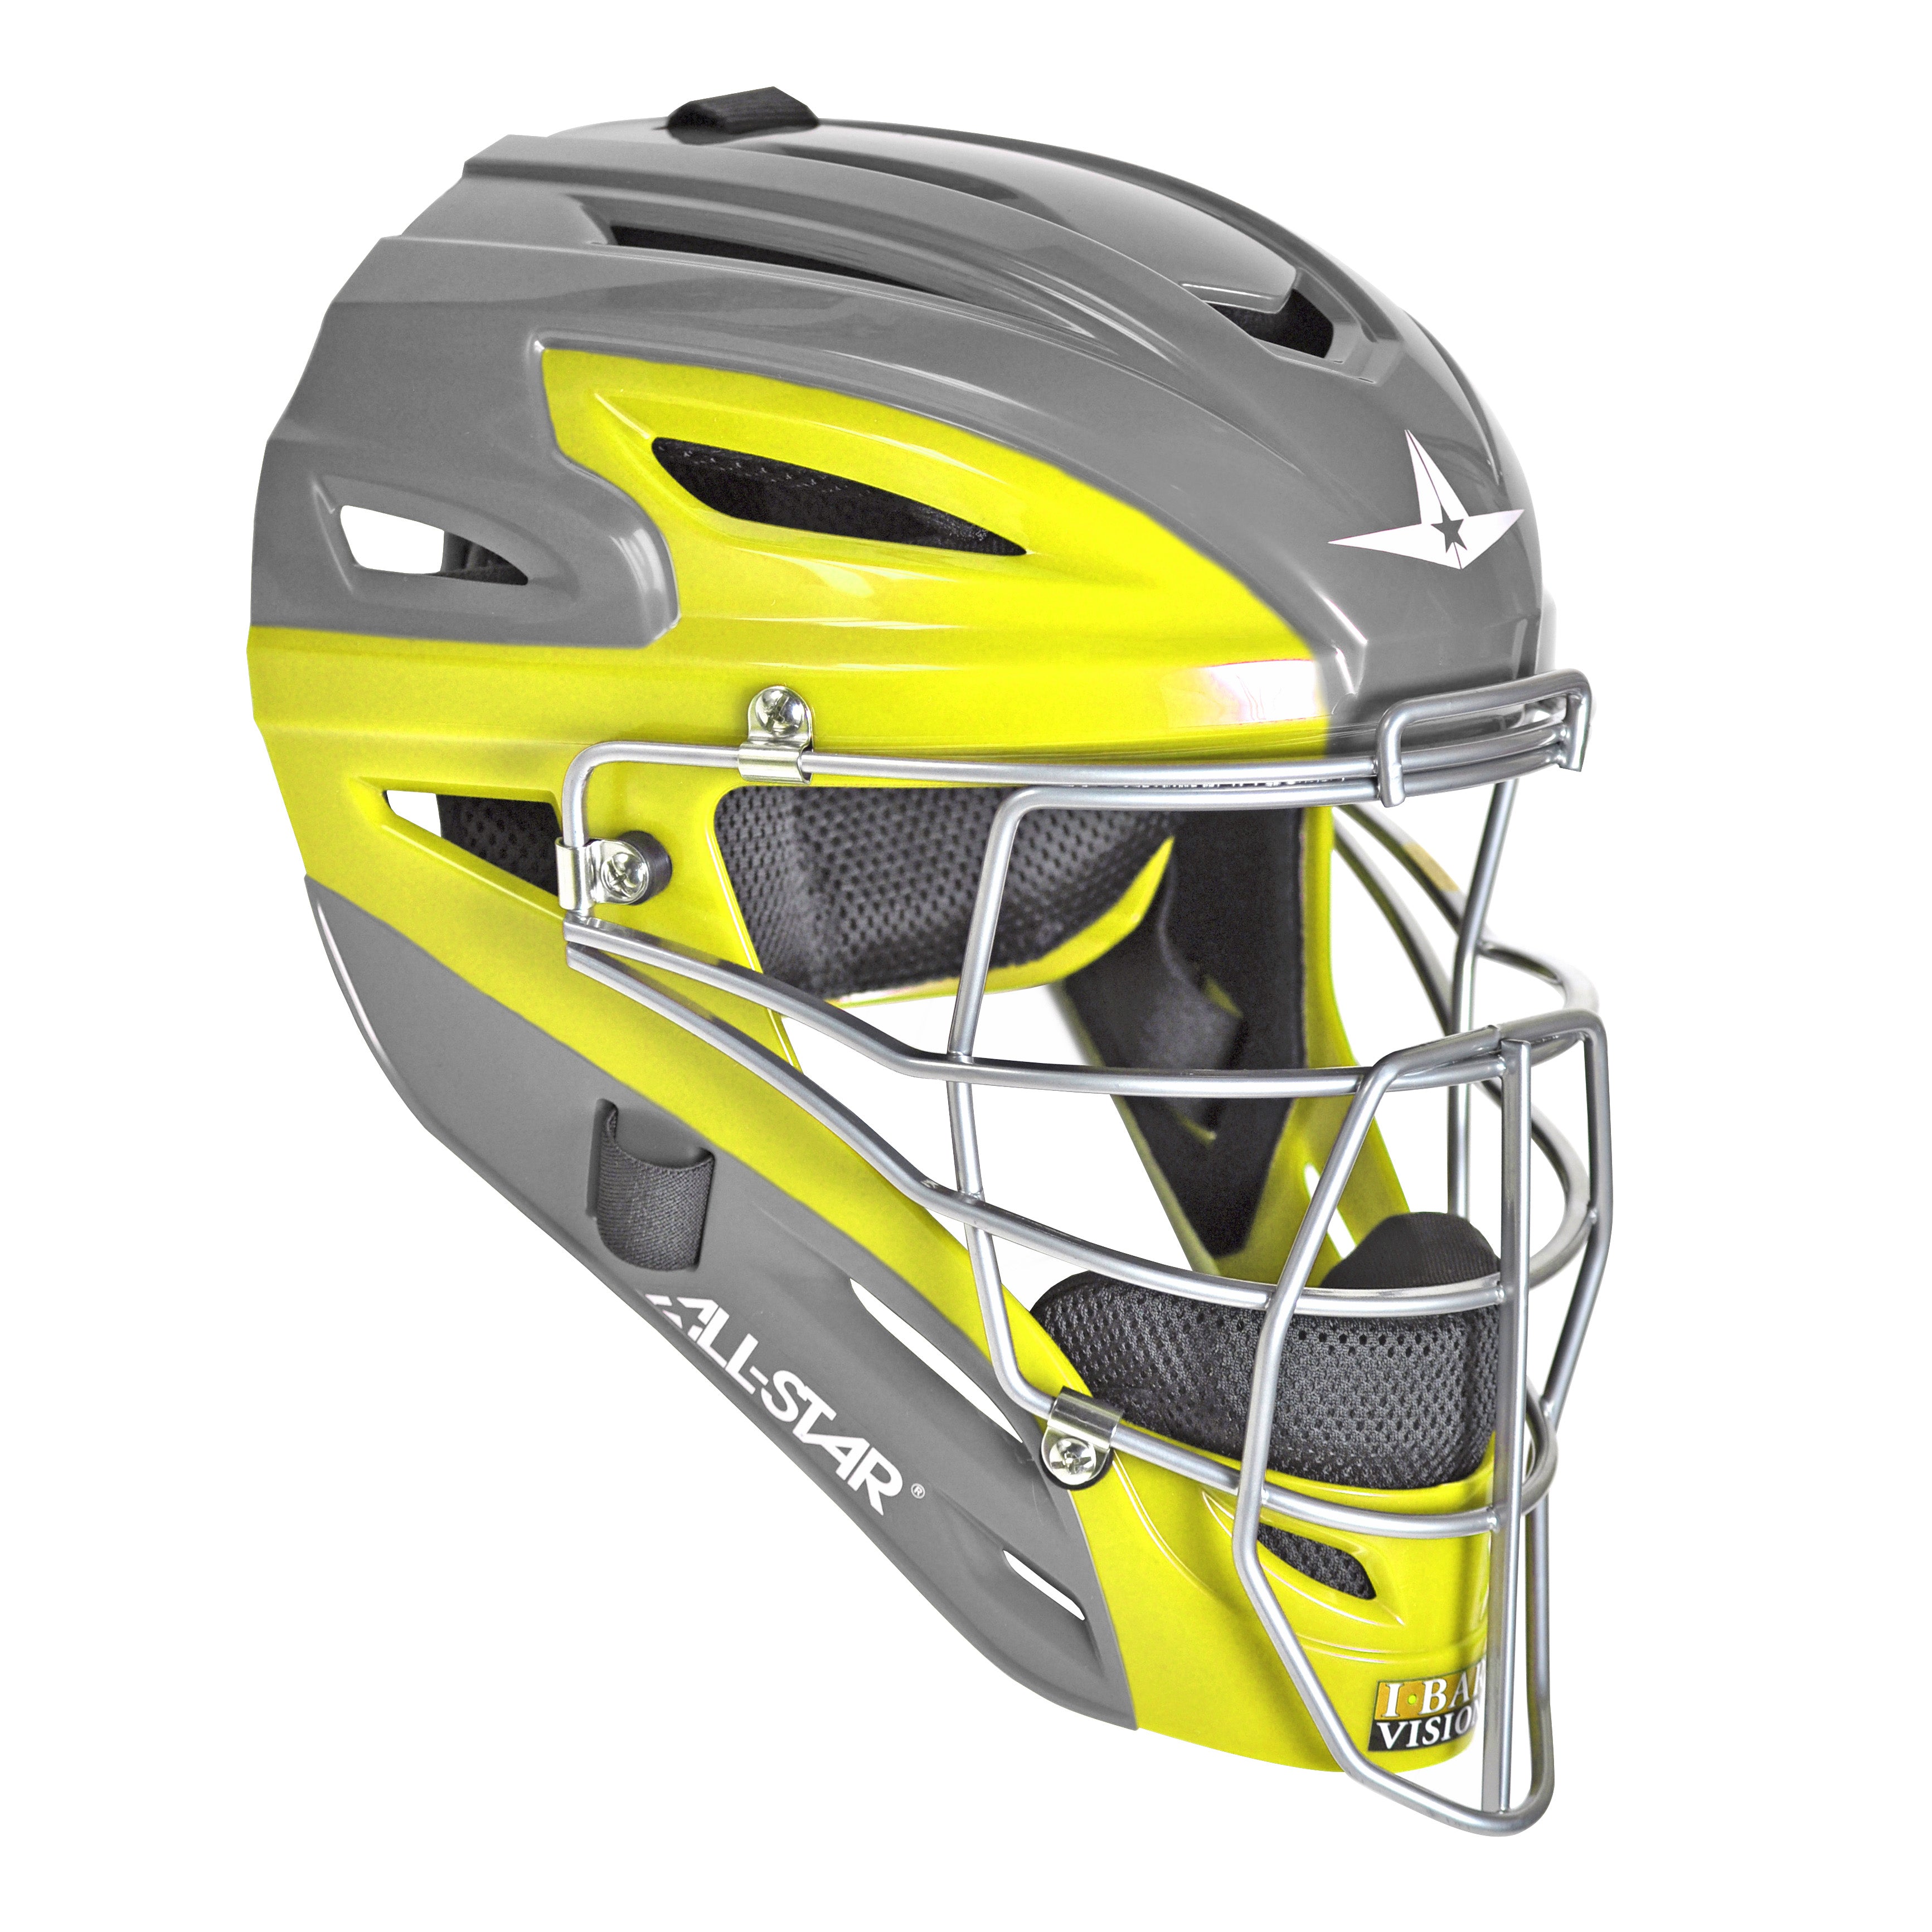 All-Star S7 AXIS Helmet/ Two Tone / Ages 12-16